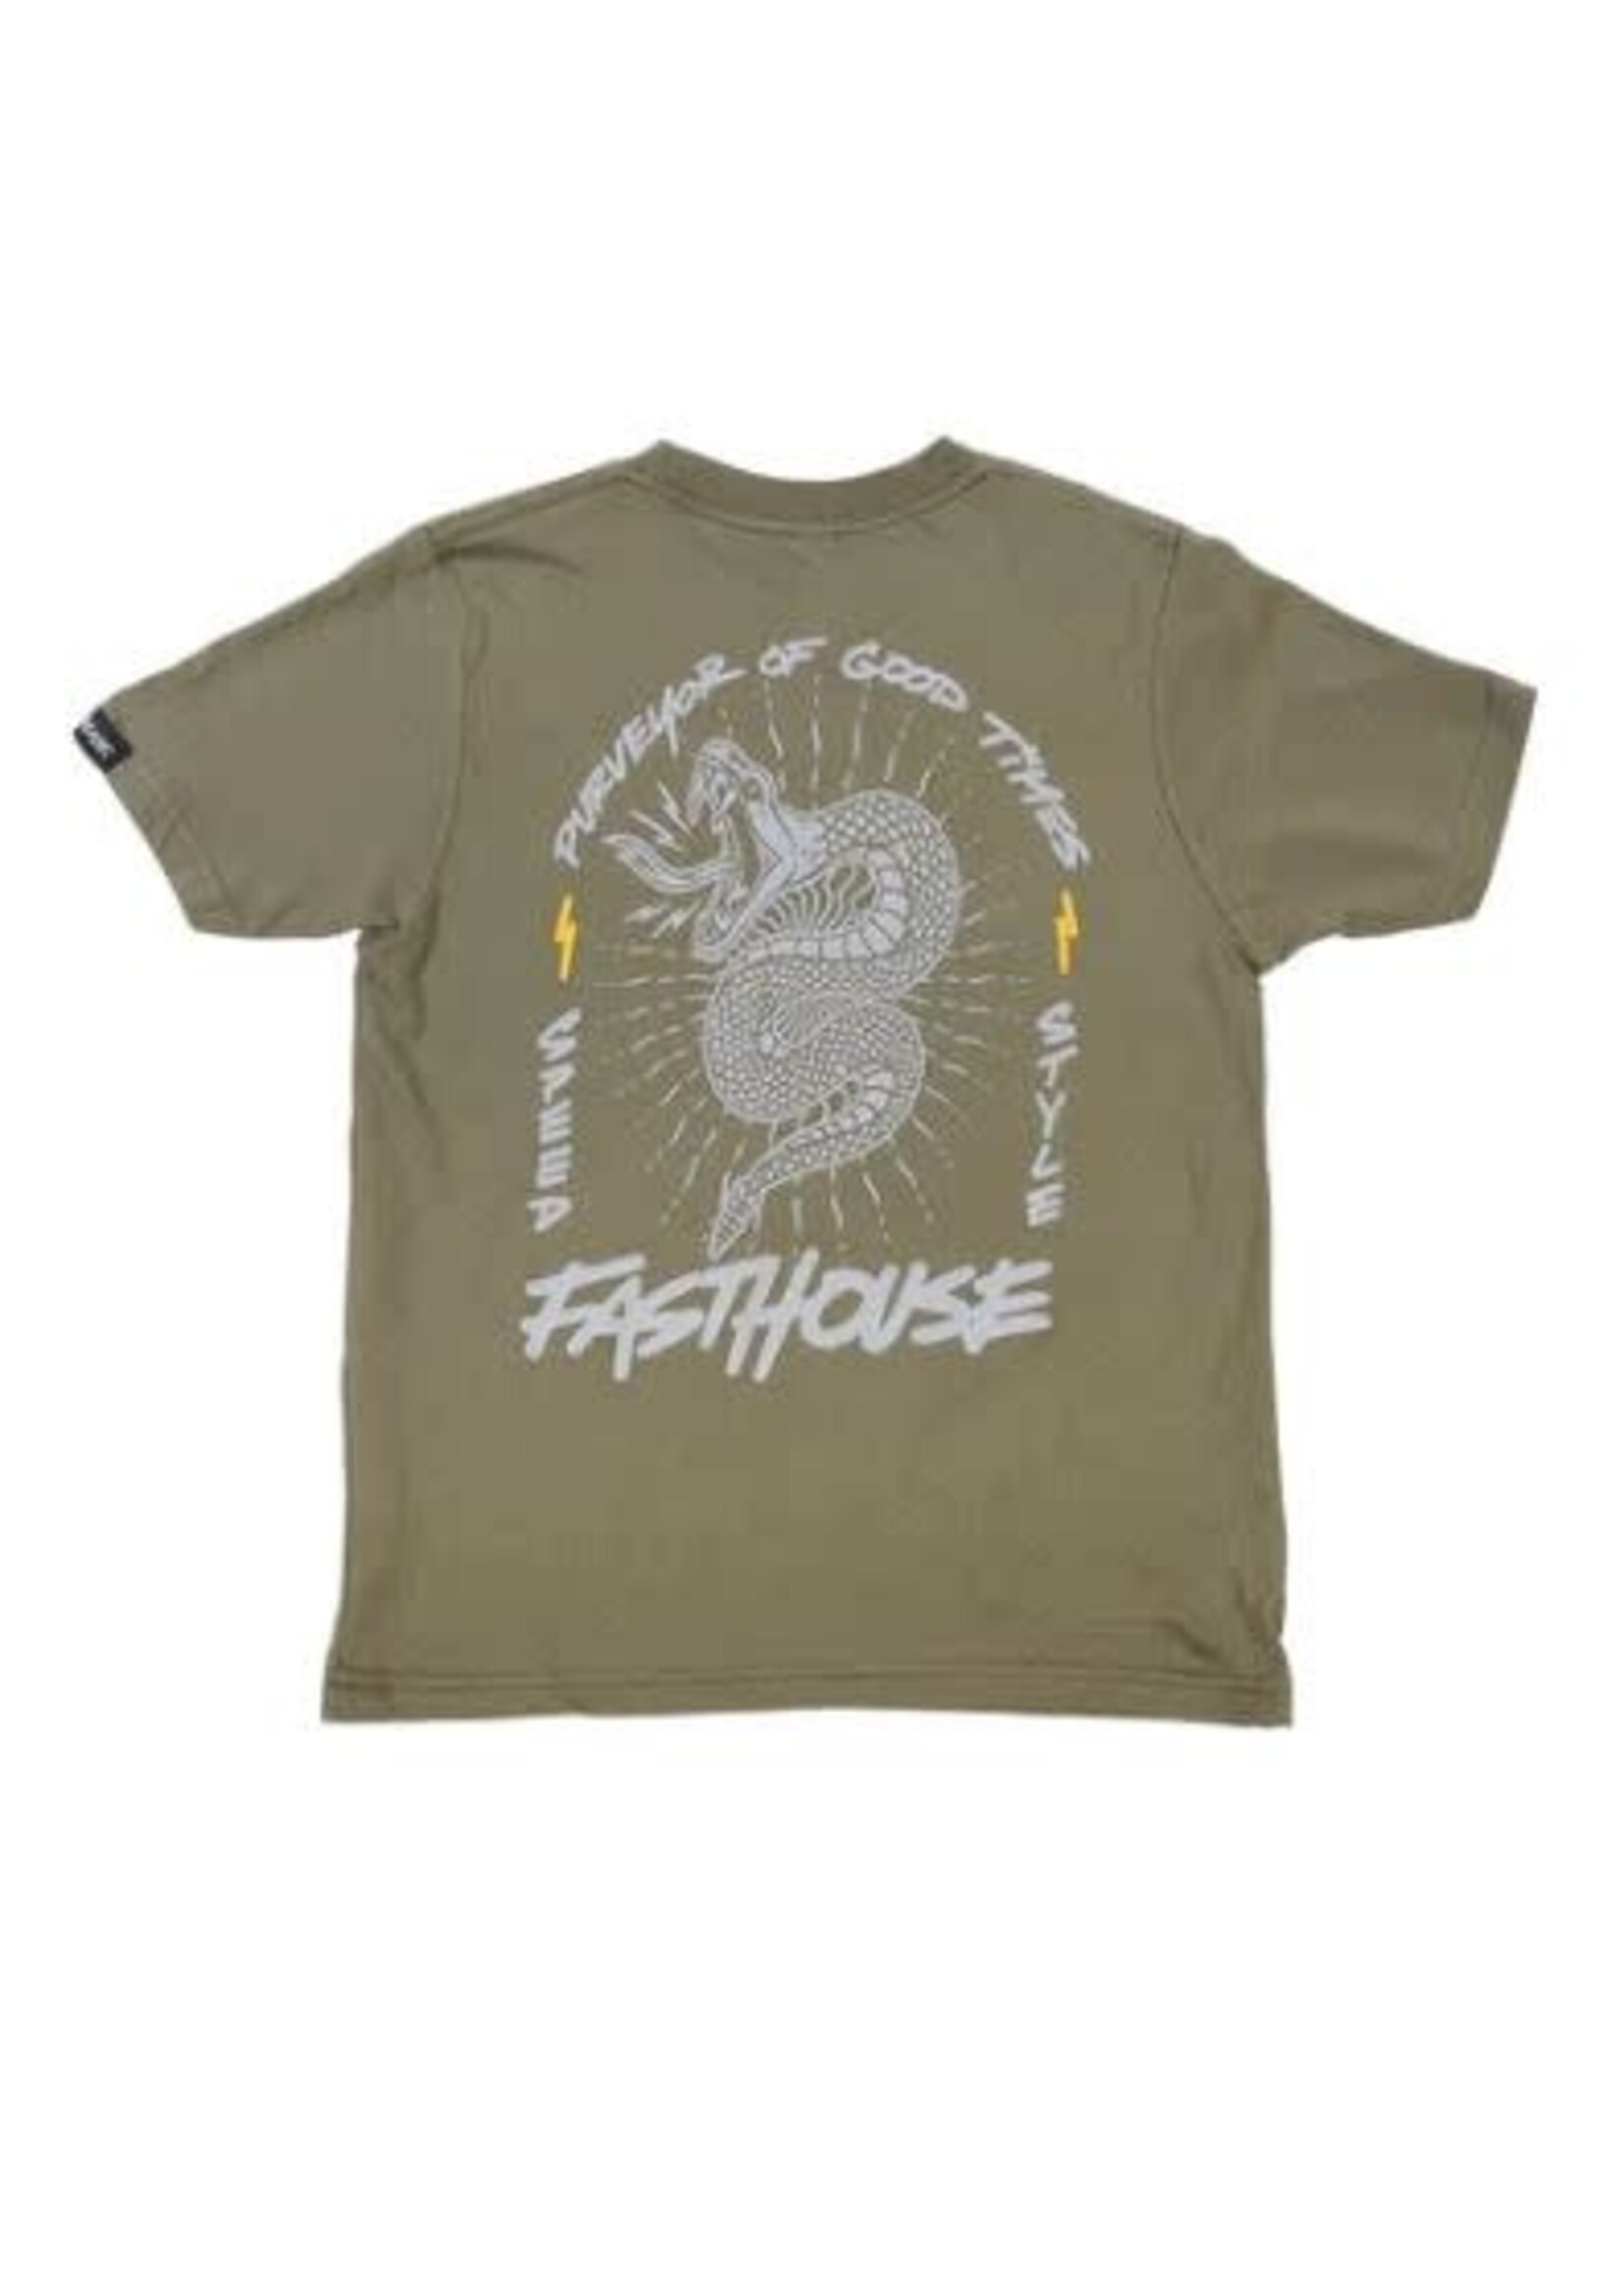 FASTHOUSE Venom Tee Light Olive YOUTH